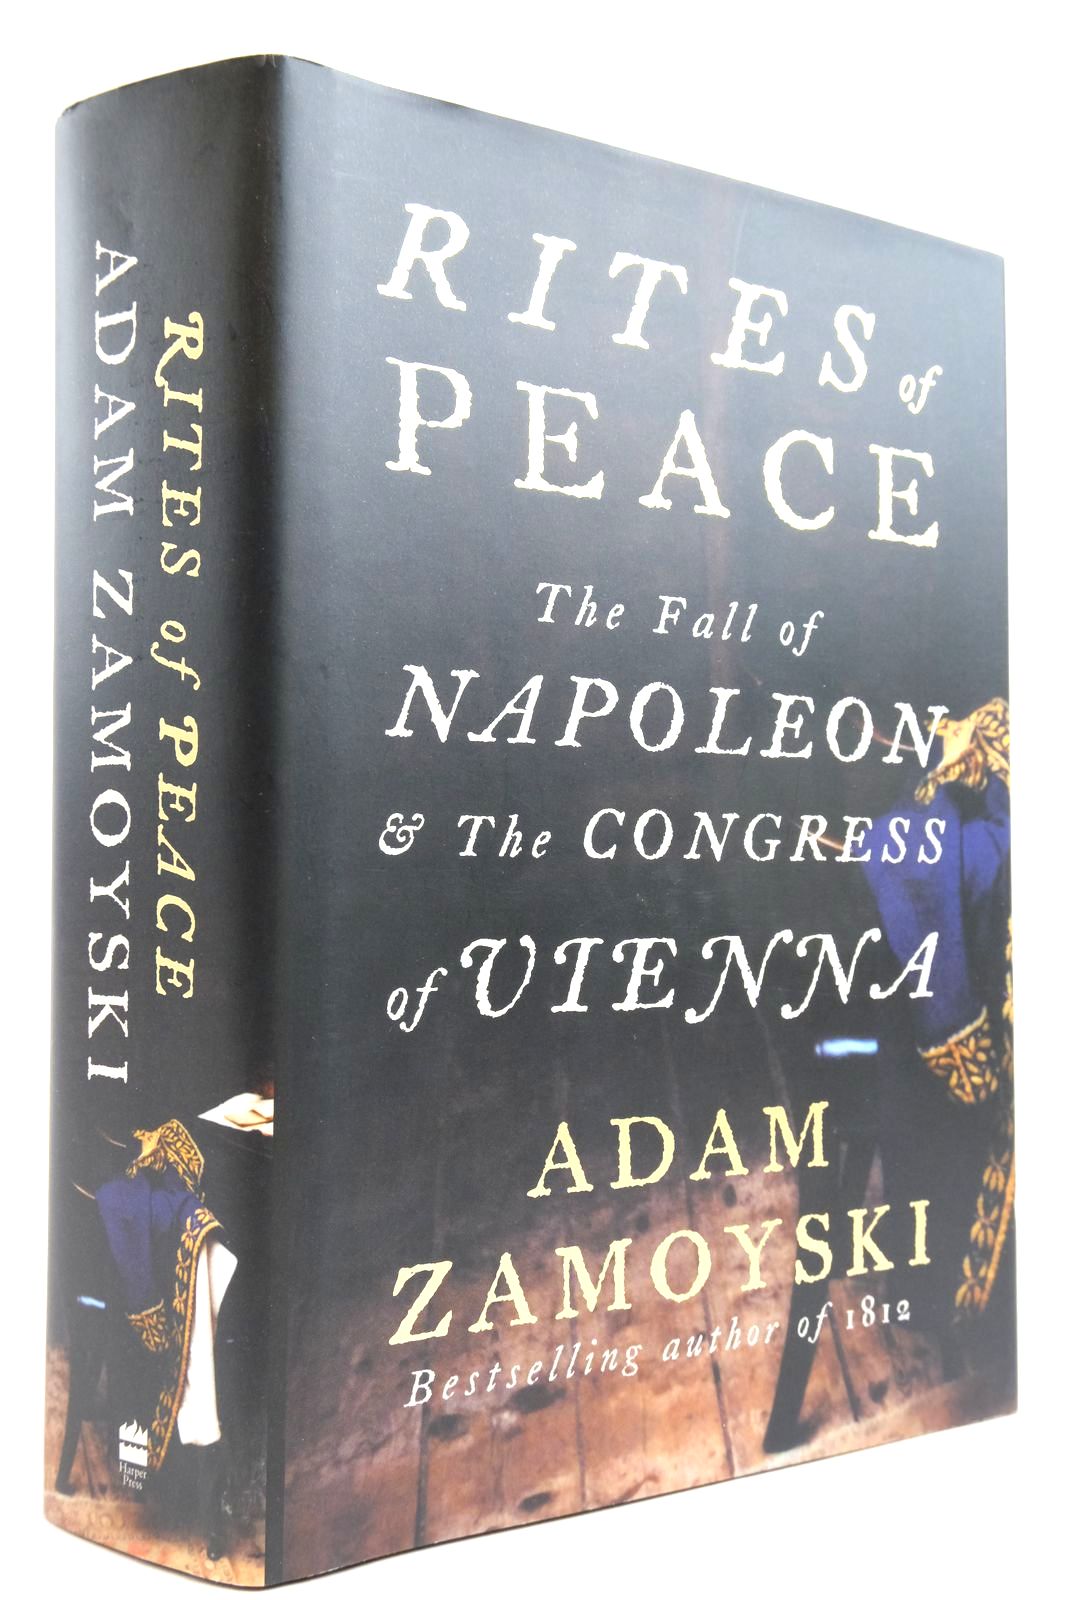 Photo of RITES OF PEACE THE FALL OF NAPOLEON &AMP; THE CONGRESS OF VIENNA written by Zamoyski, Adam published by Harper Press (STOCK CODE: 2135394)  for sale by Stella & Rose's Books